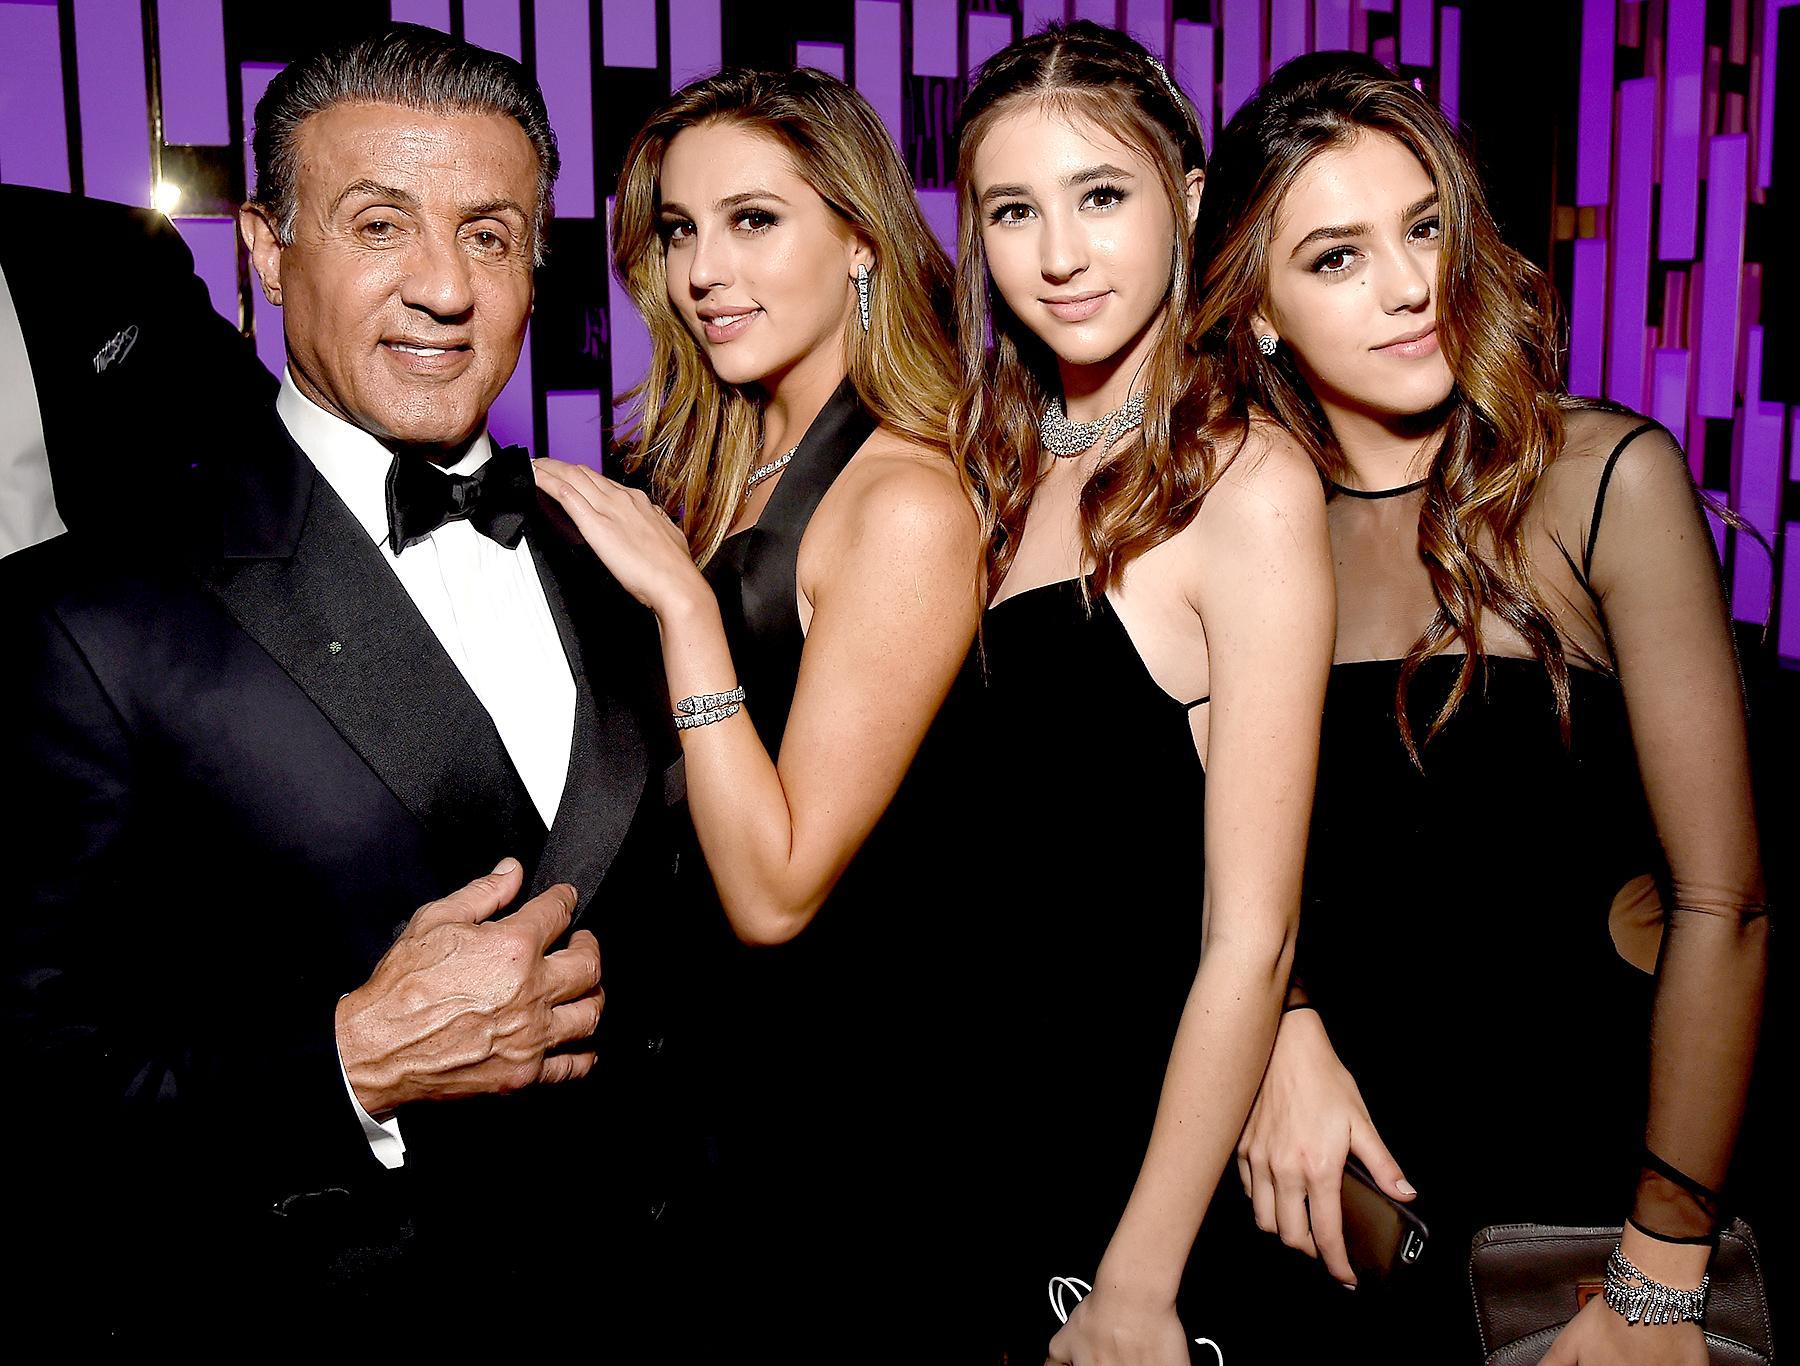 Sylvester Stallone's Daughters Stole Liam Hemsworth's Number